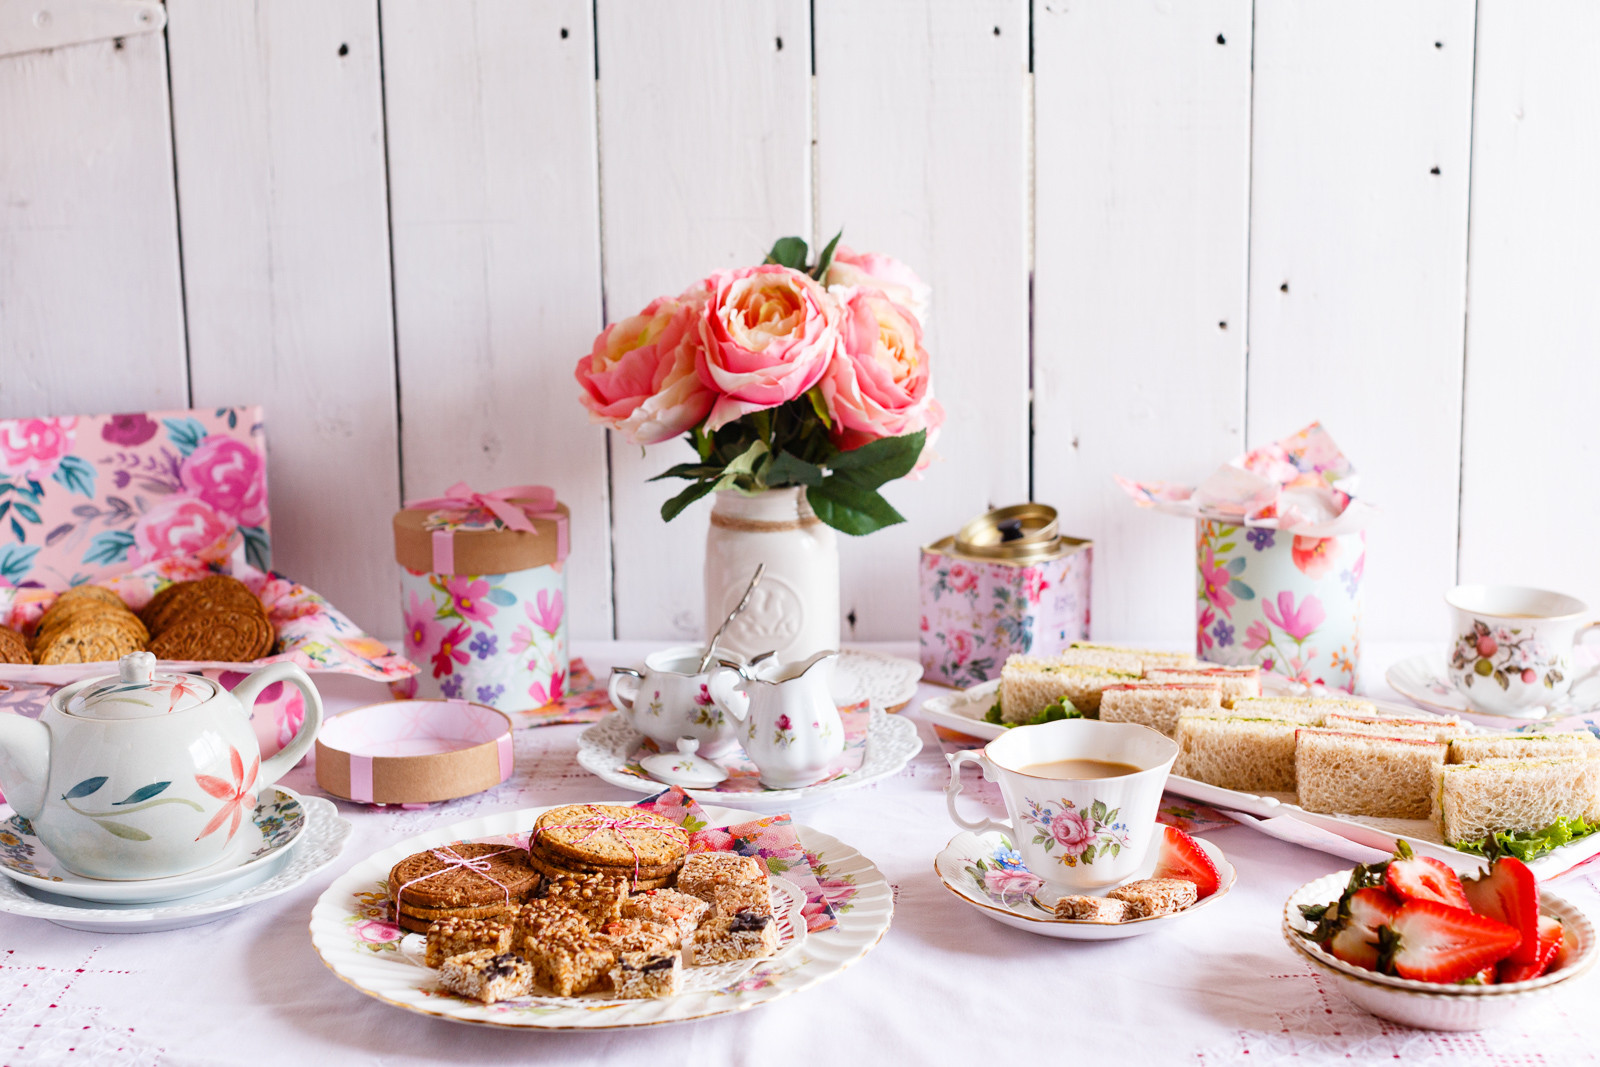 Childrens Tea Party Food Ideas
 Afternoon Tea Party for Kids Nature s Path